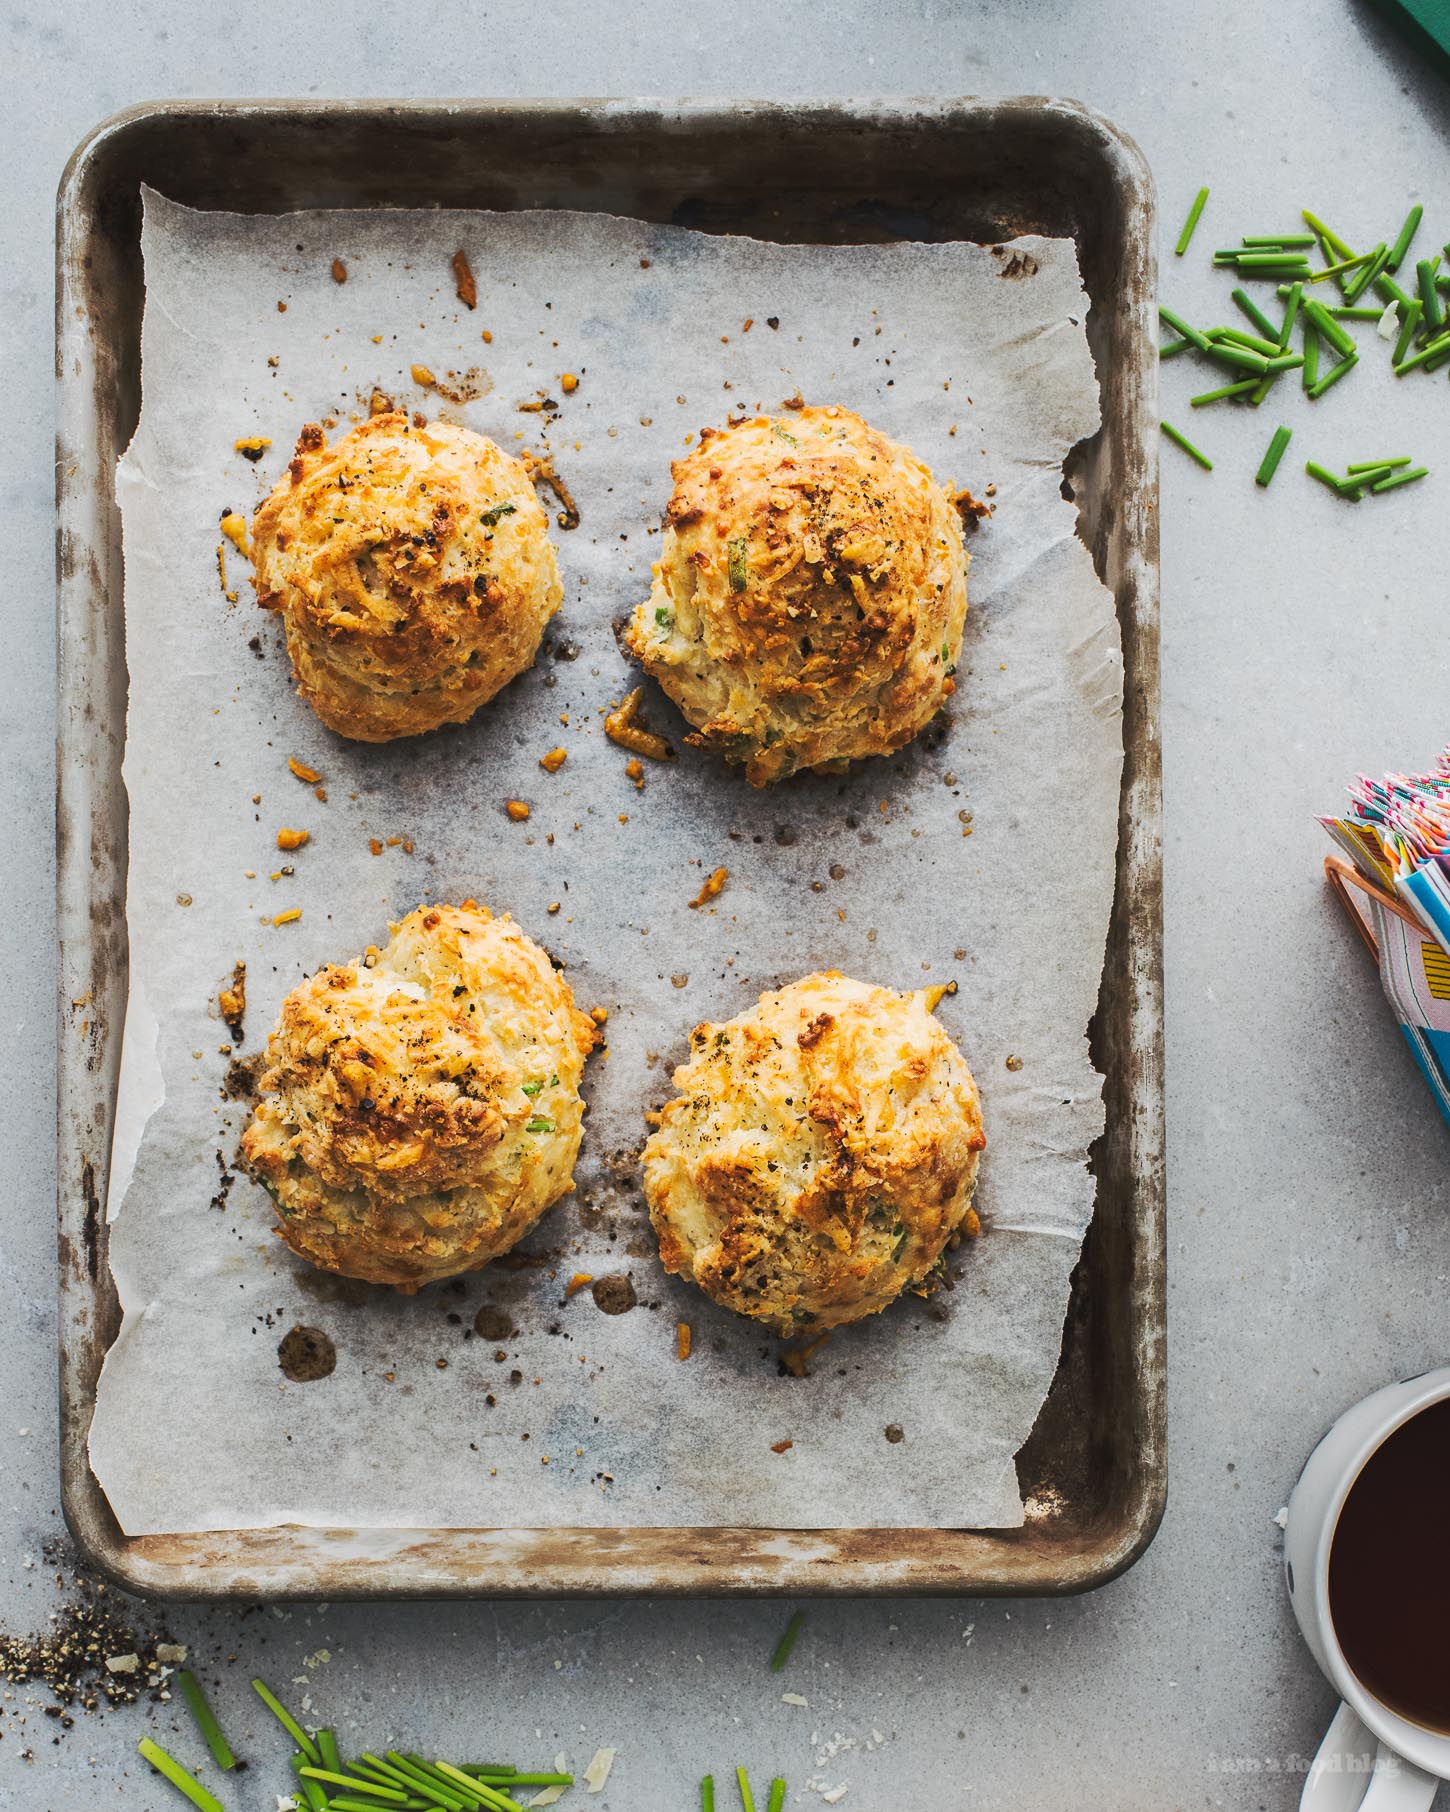 Small Batch Black Pepper Parmesan Chive Biscuit Recipe | www.iamafoodblog.com